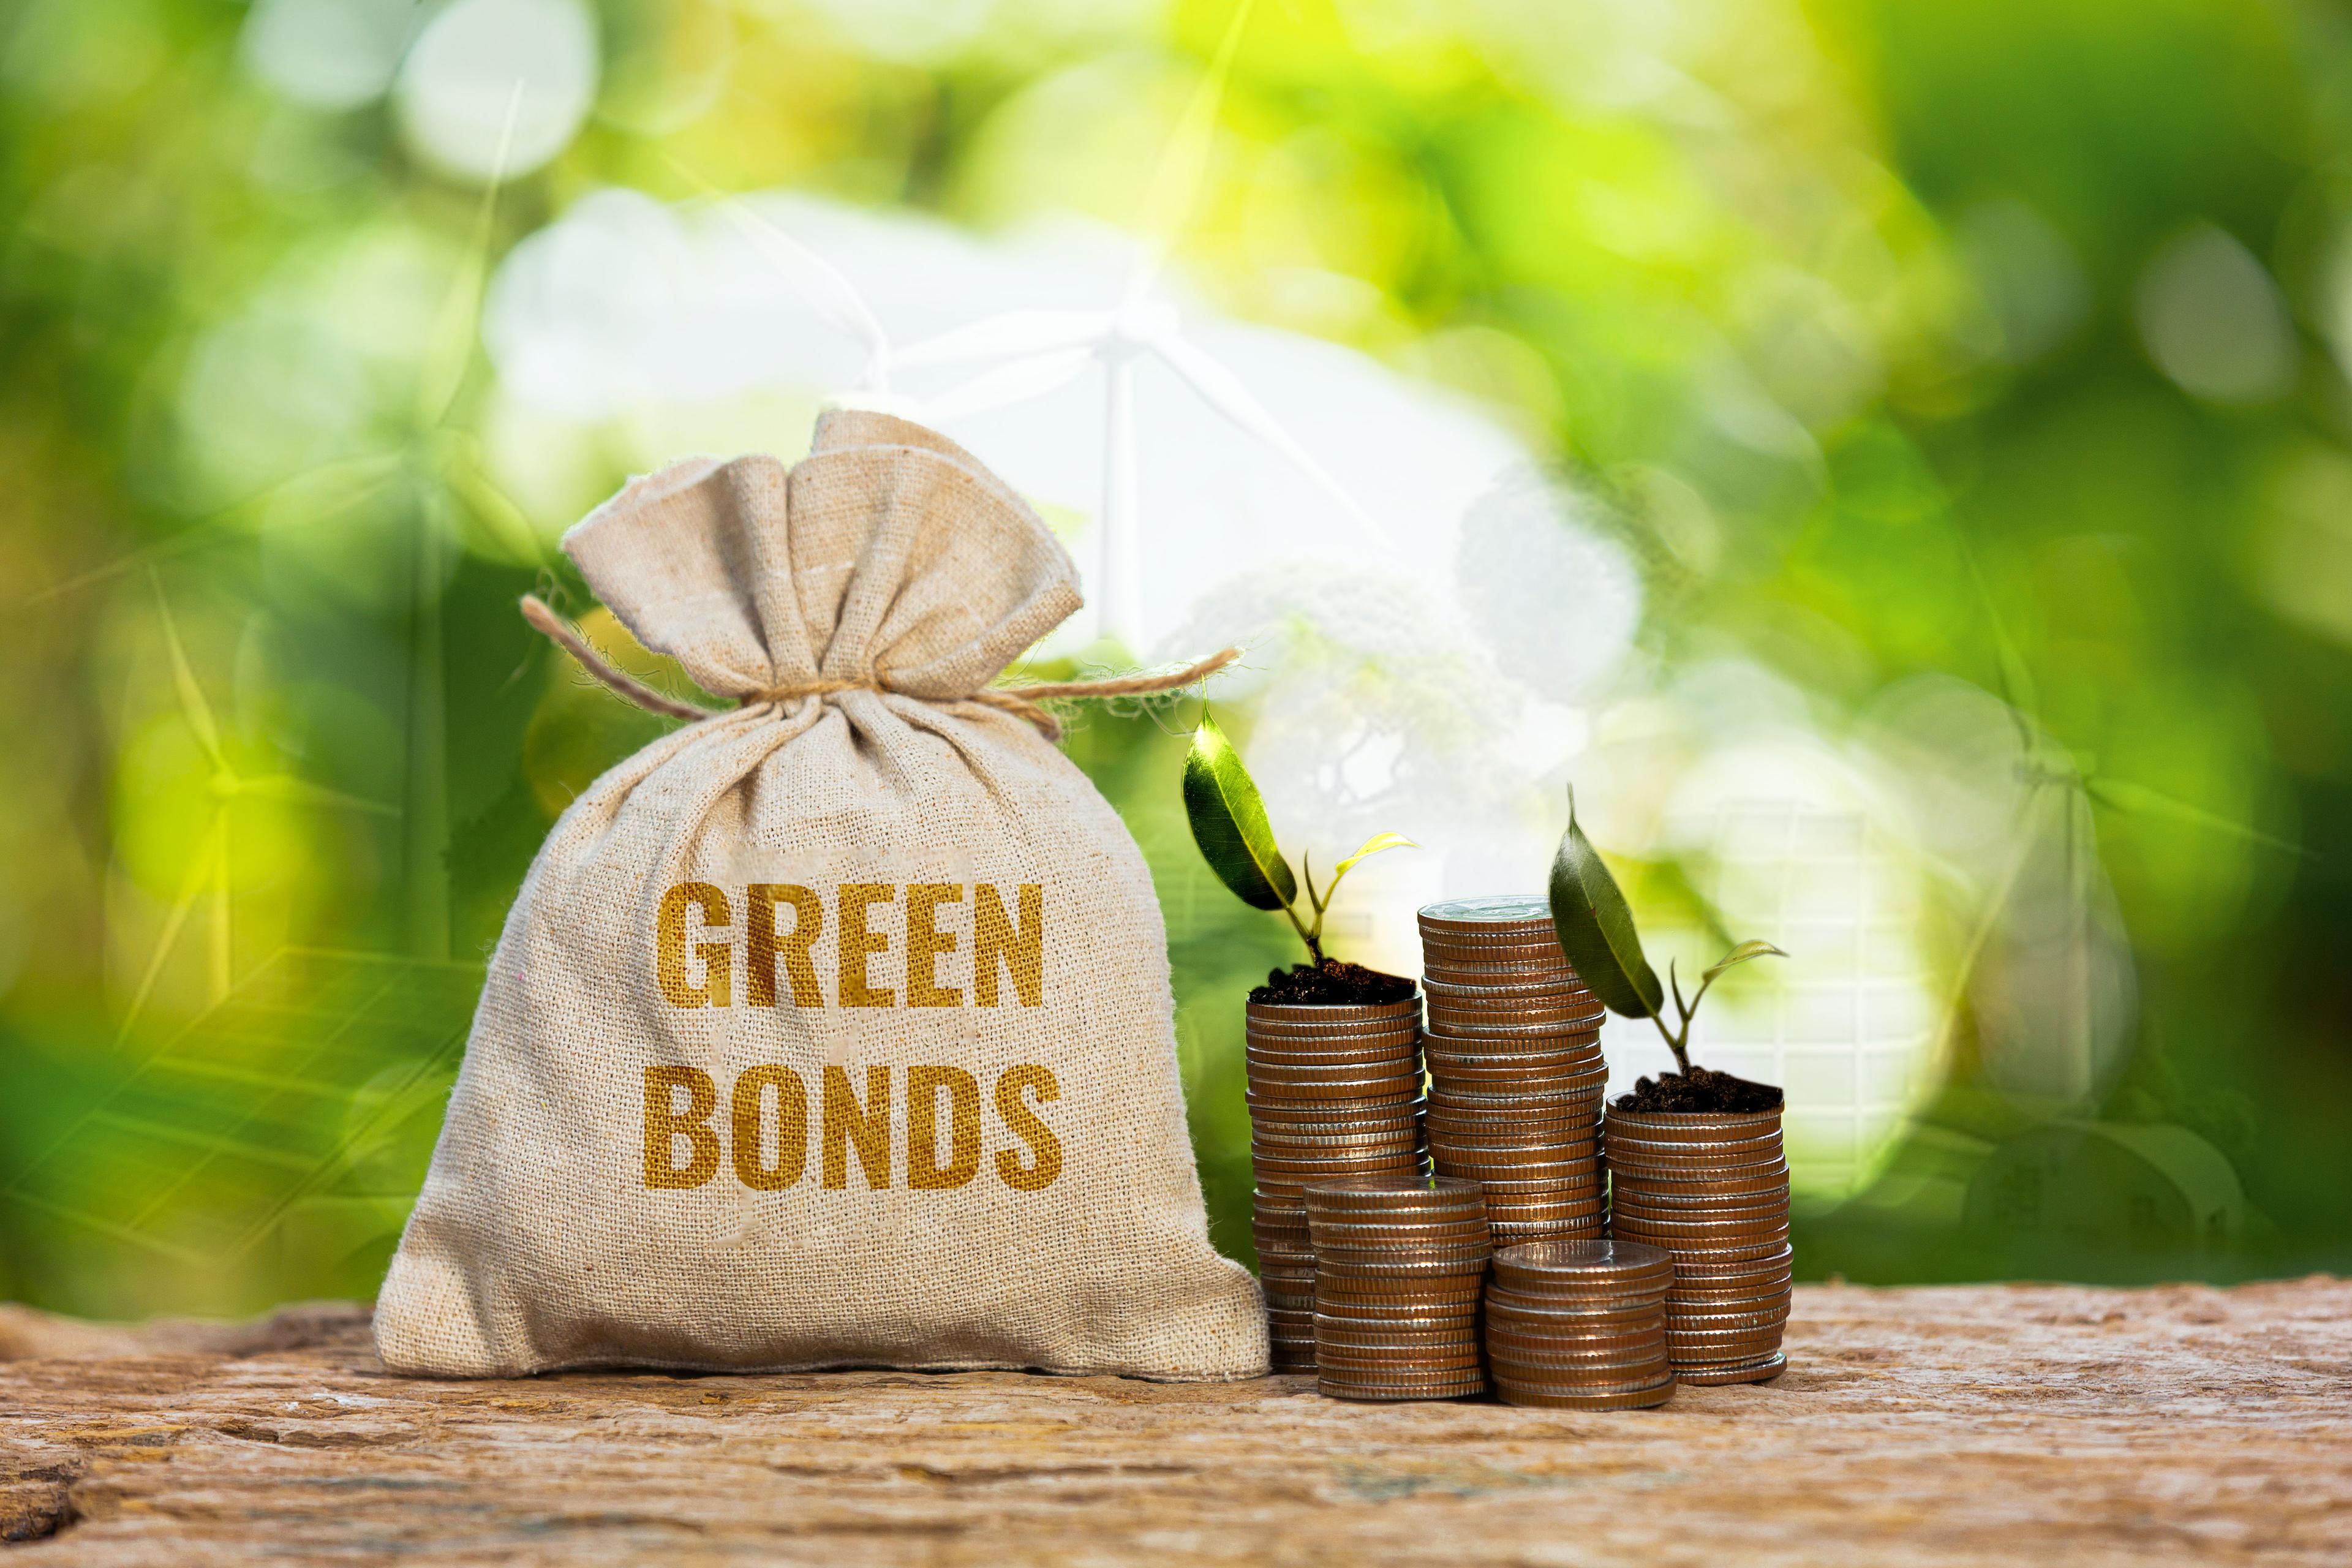 Are green bonds taking the place of carbon credits in Africa?